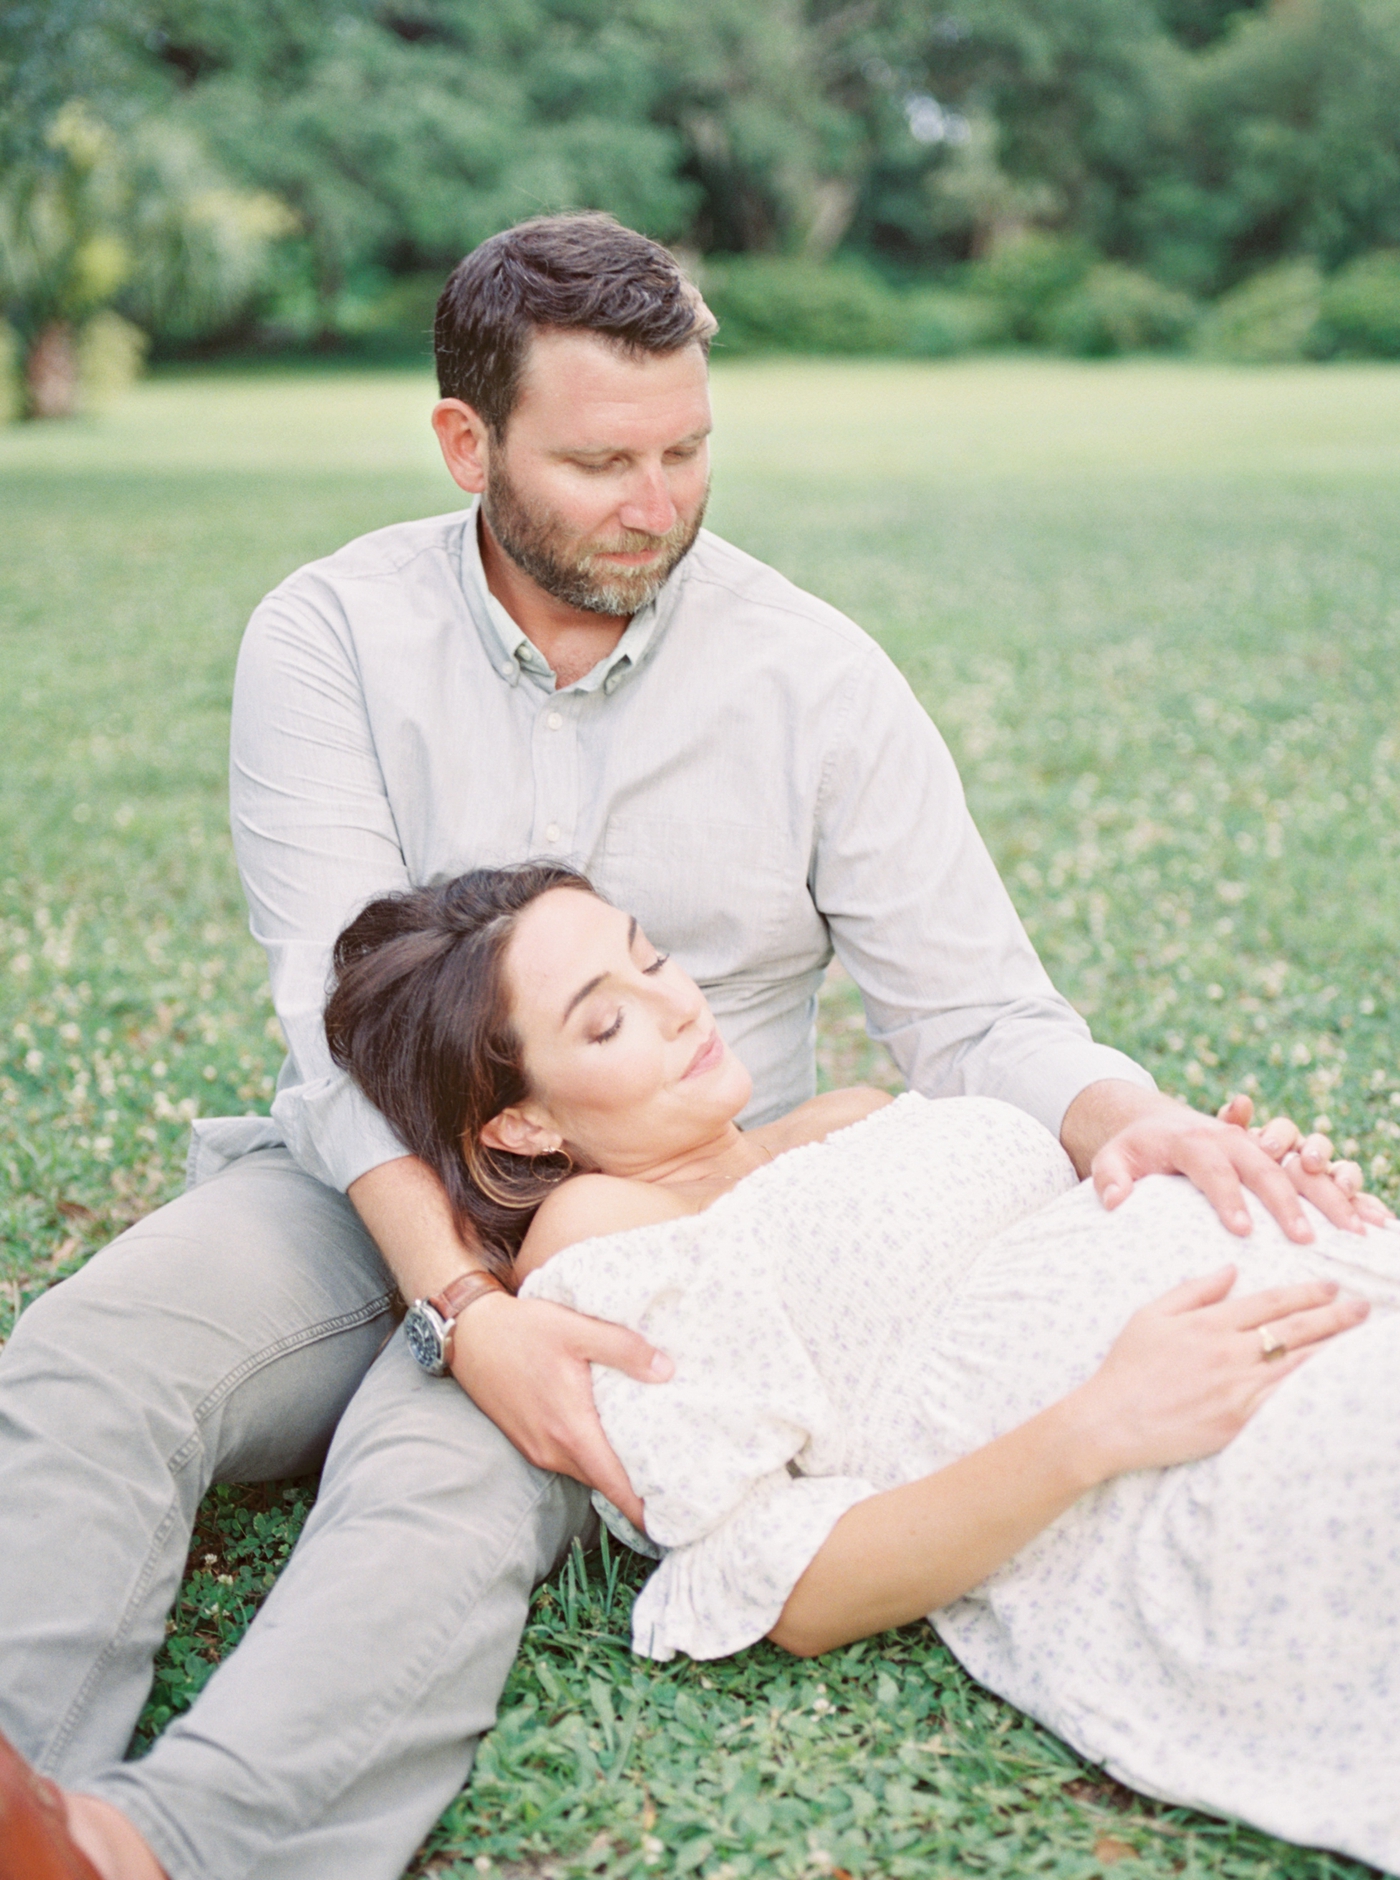 Mom to be laying with her head in her husband's lap | Photo by Caitlyn Motycka Photography.